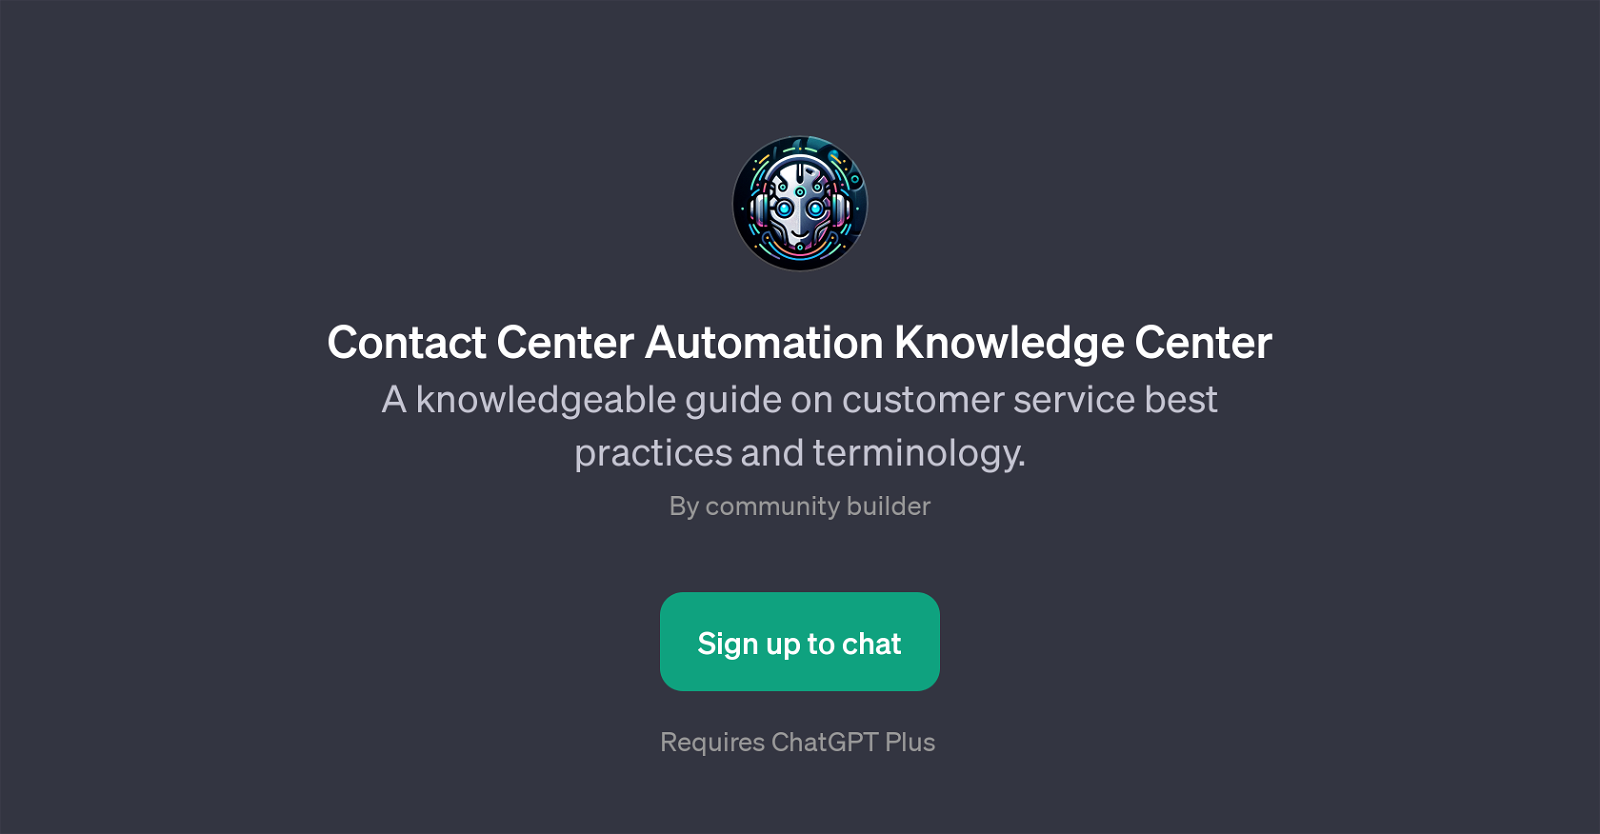 Contact Center Automation Knowledge Center website